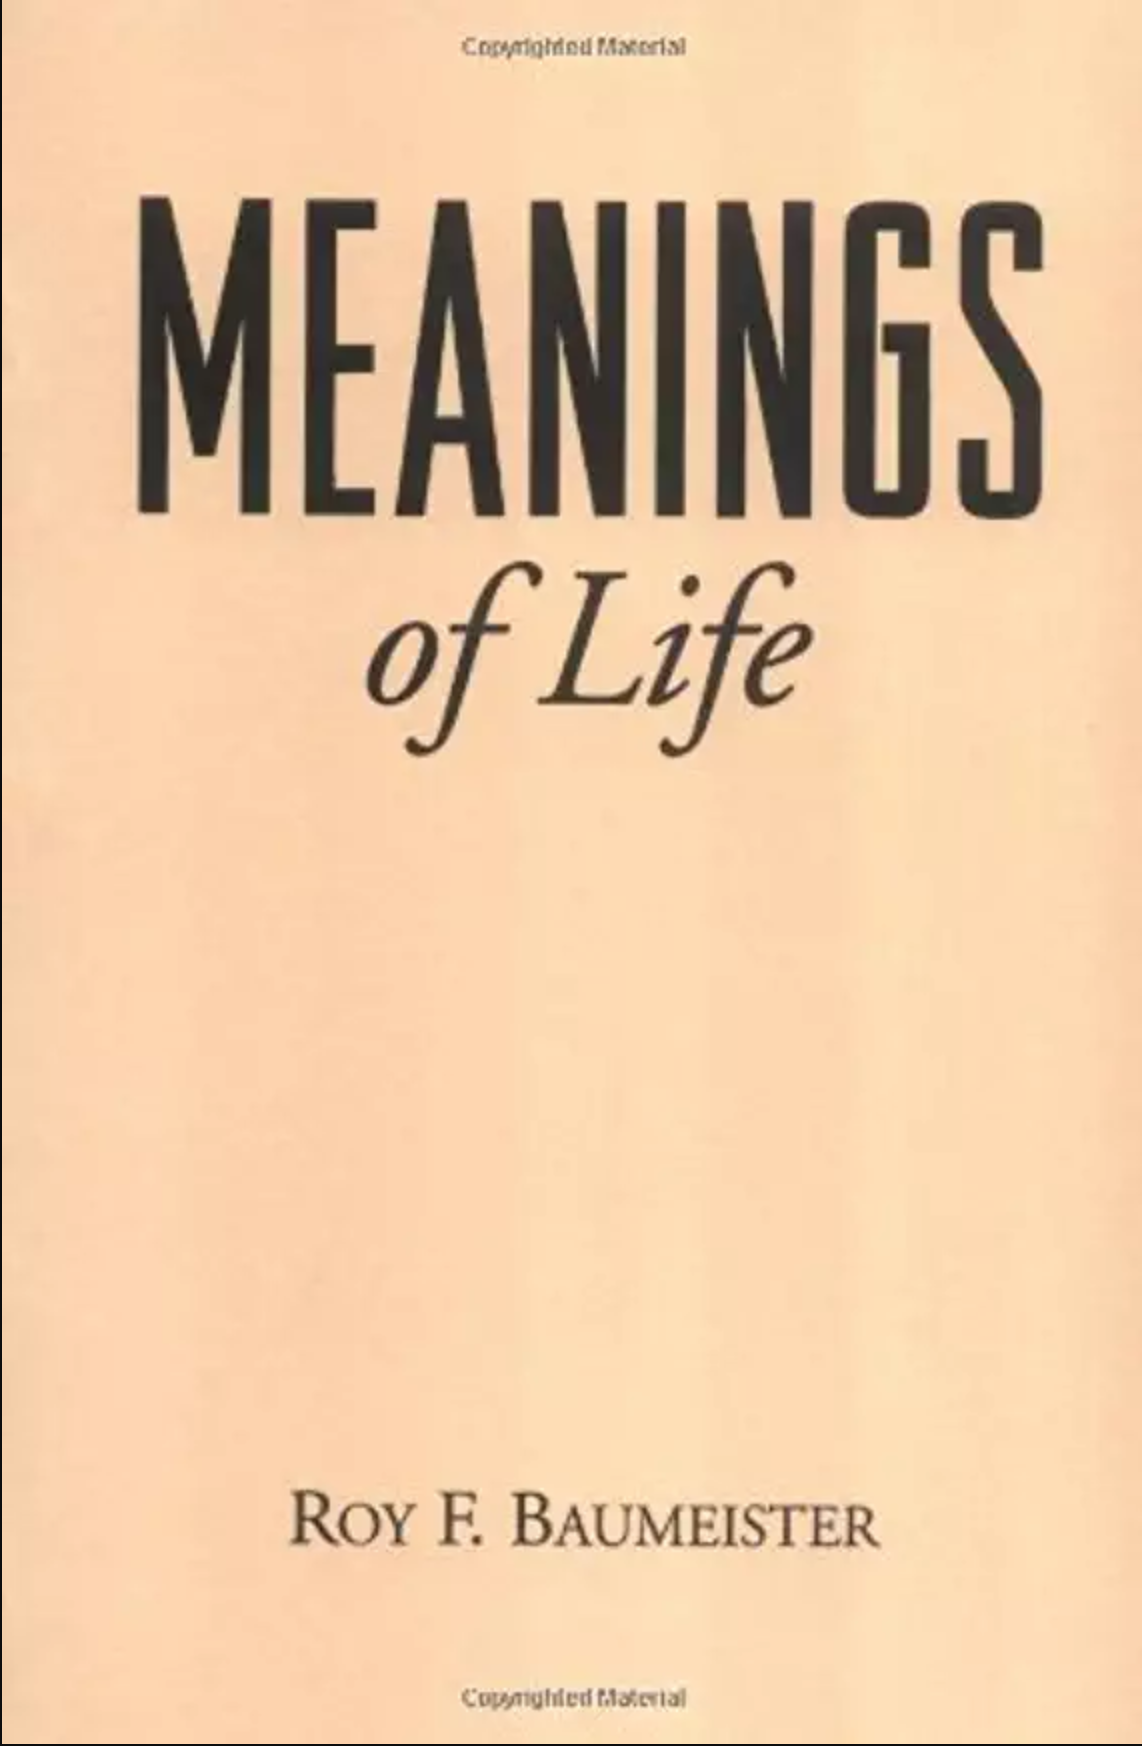 Book cover of "Meanings of Life"